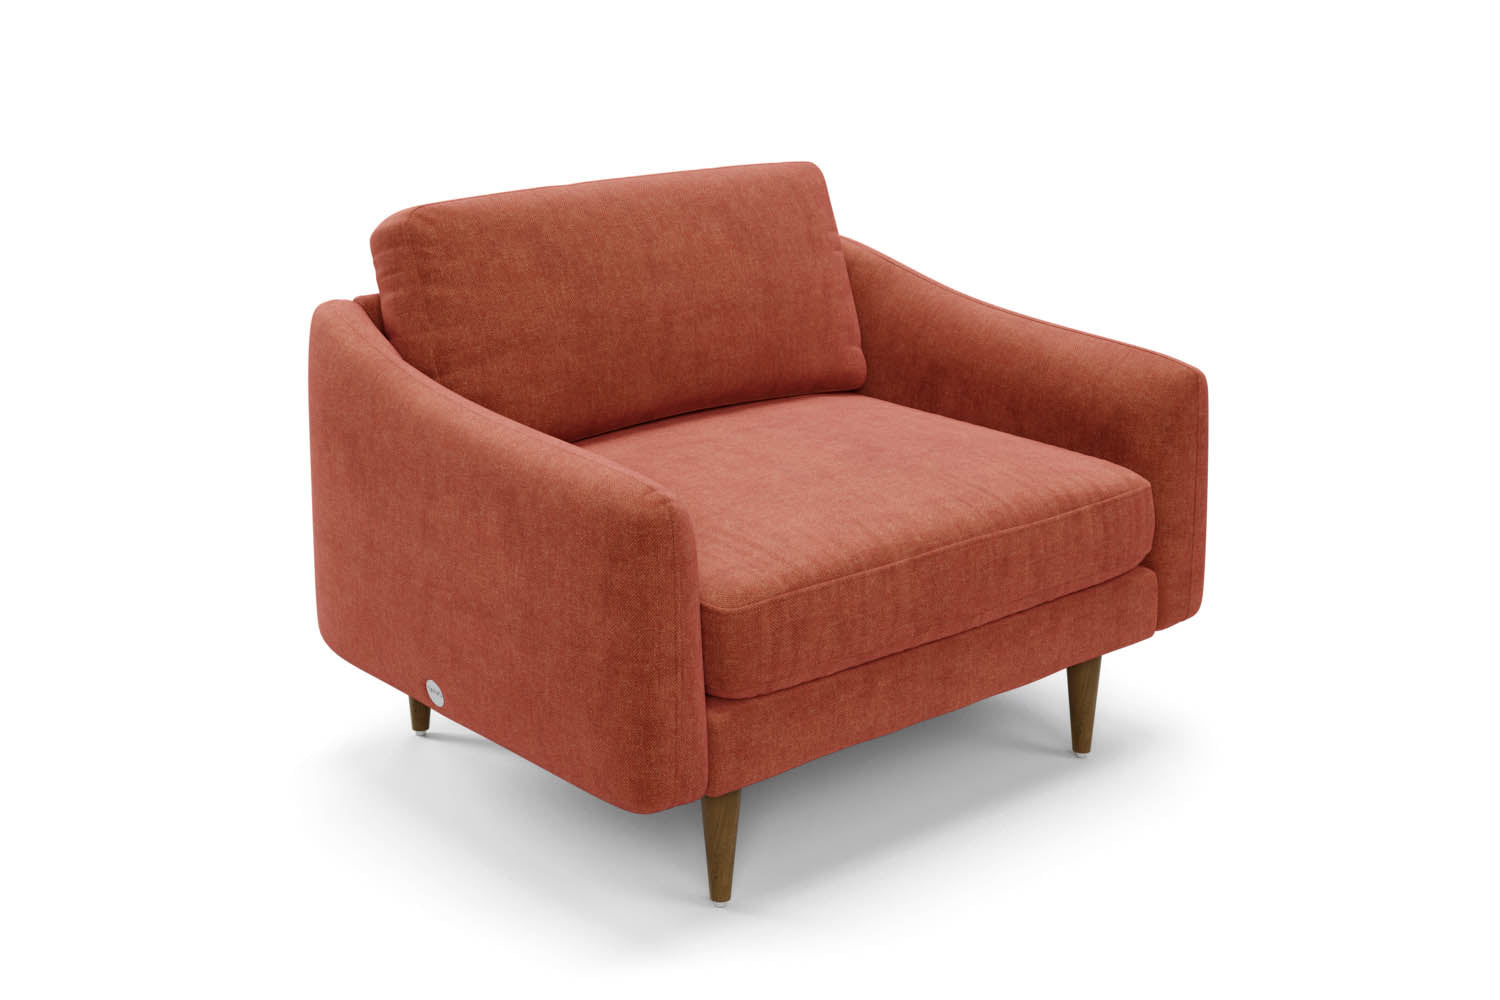 The Rebel Snuggler Sofa in Spice with brown legs